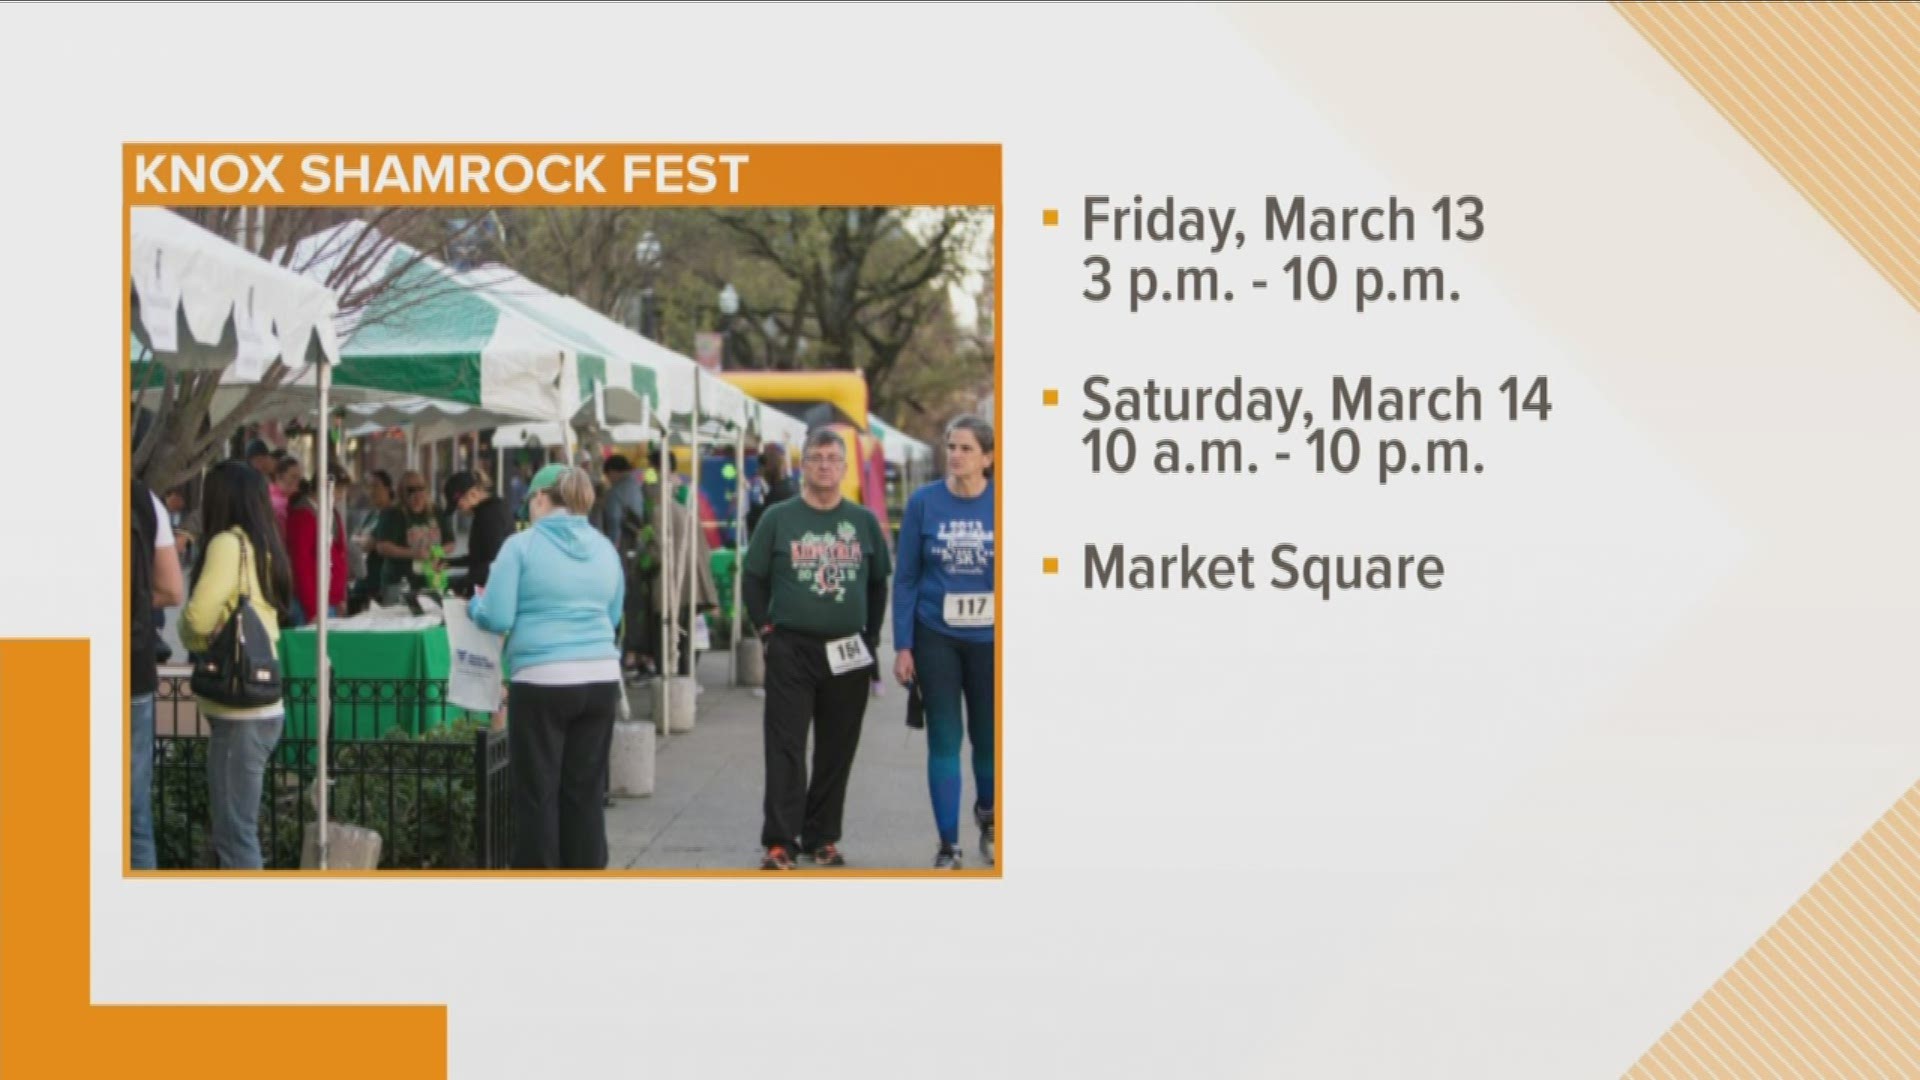 Katie Martin from the East TN Kidney Foundation talks about Knox Shamrock Fest next weekend to celebrate St. Patrick's Day and to support local dialysis patients.